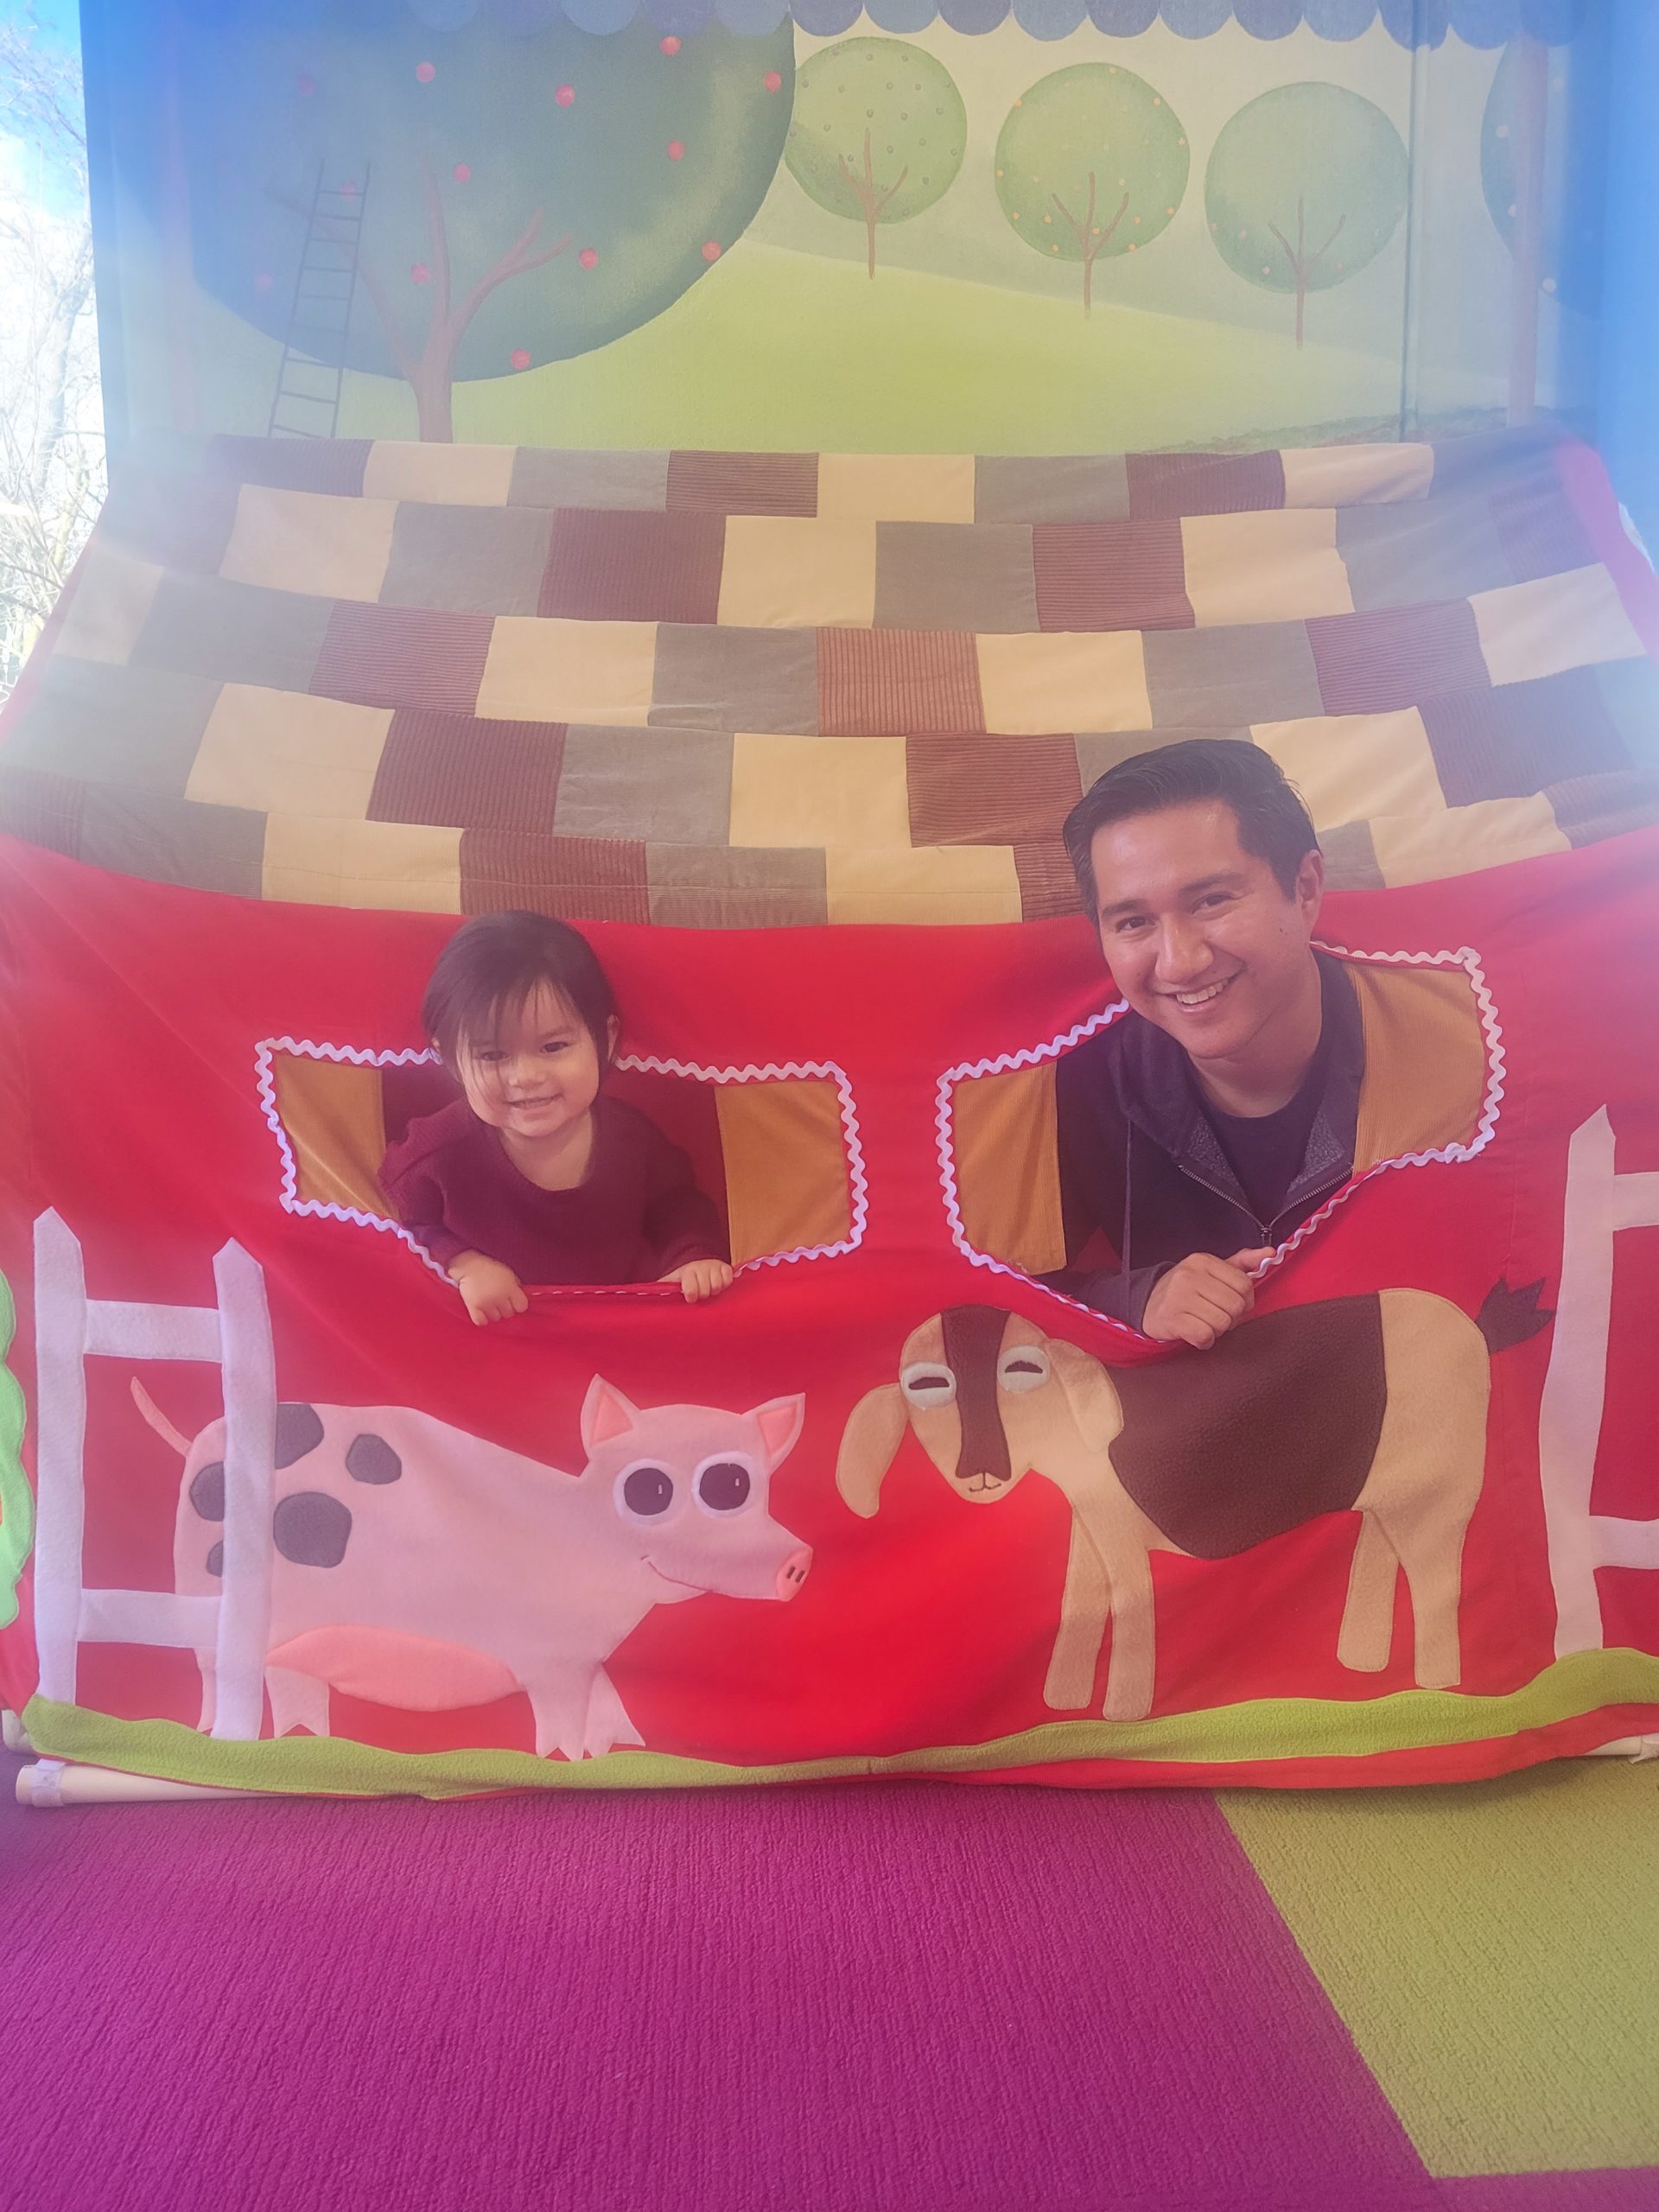 A man and his daughter smile from a fake red barn playhouse